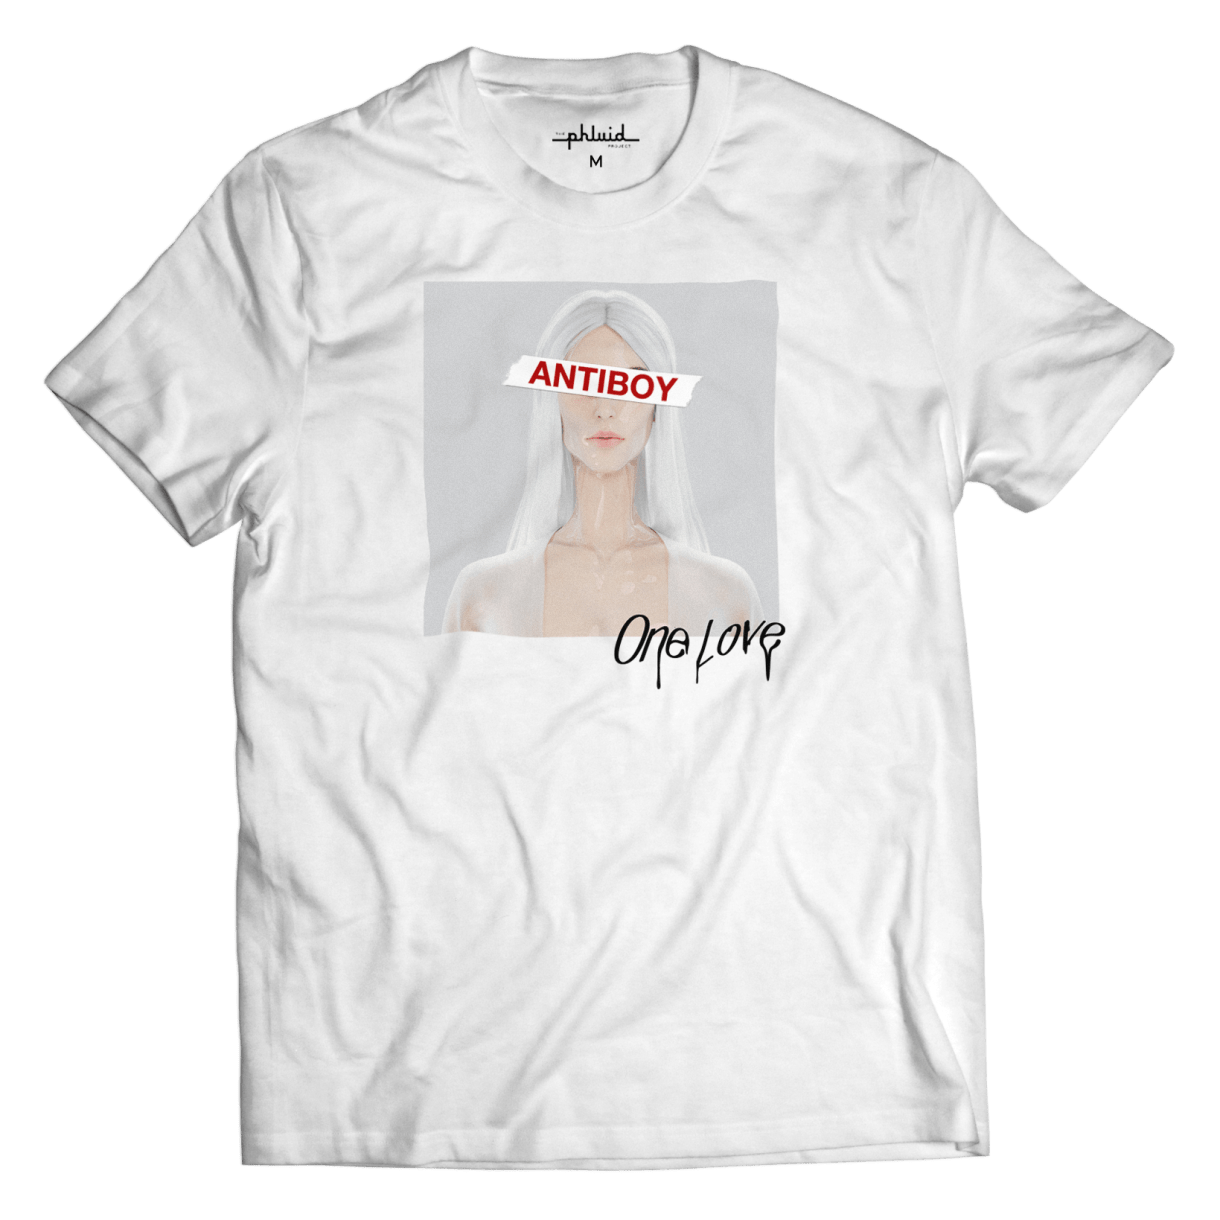 White t-shirt with a picture of a white person with long white hair, and the word "ANTIBOY" in red letters over the eyes. The word "One Love" is black ink dripping on the lower corner of the image.